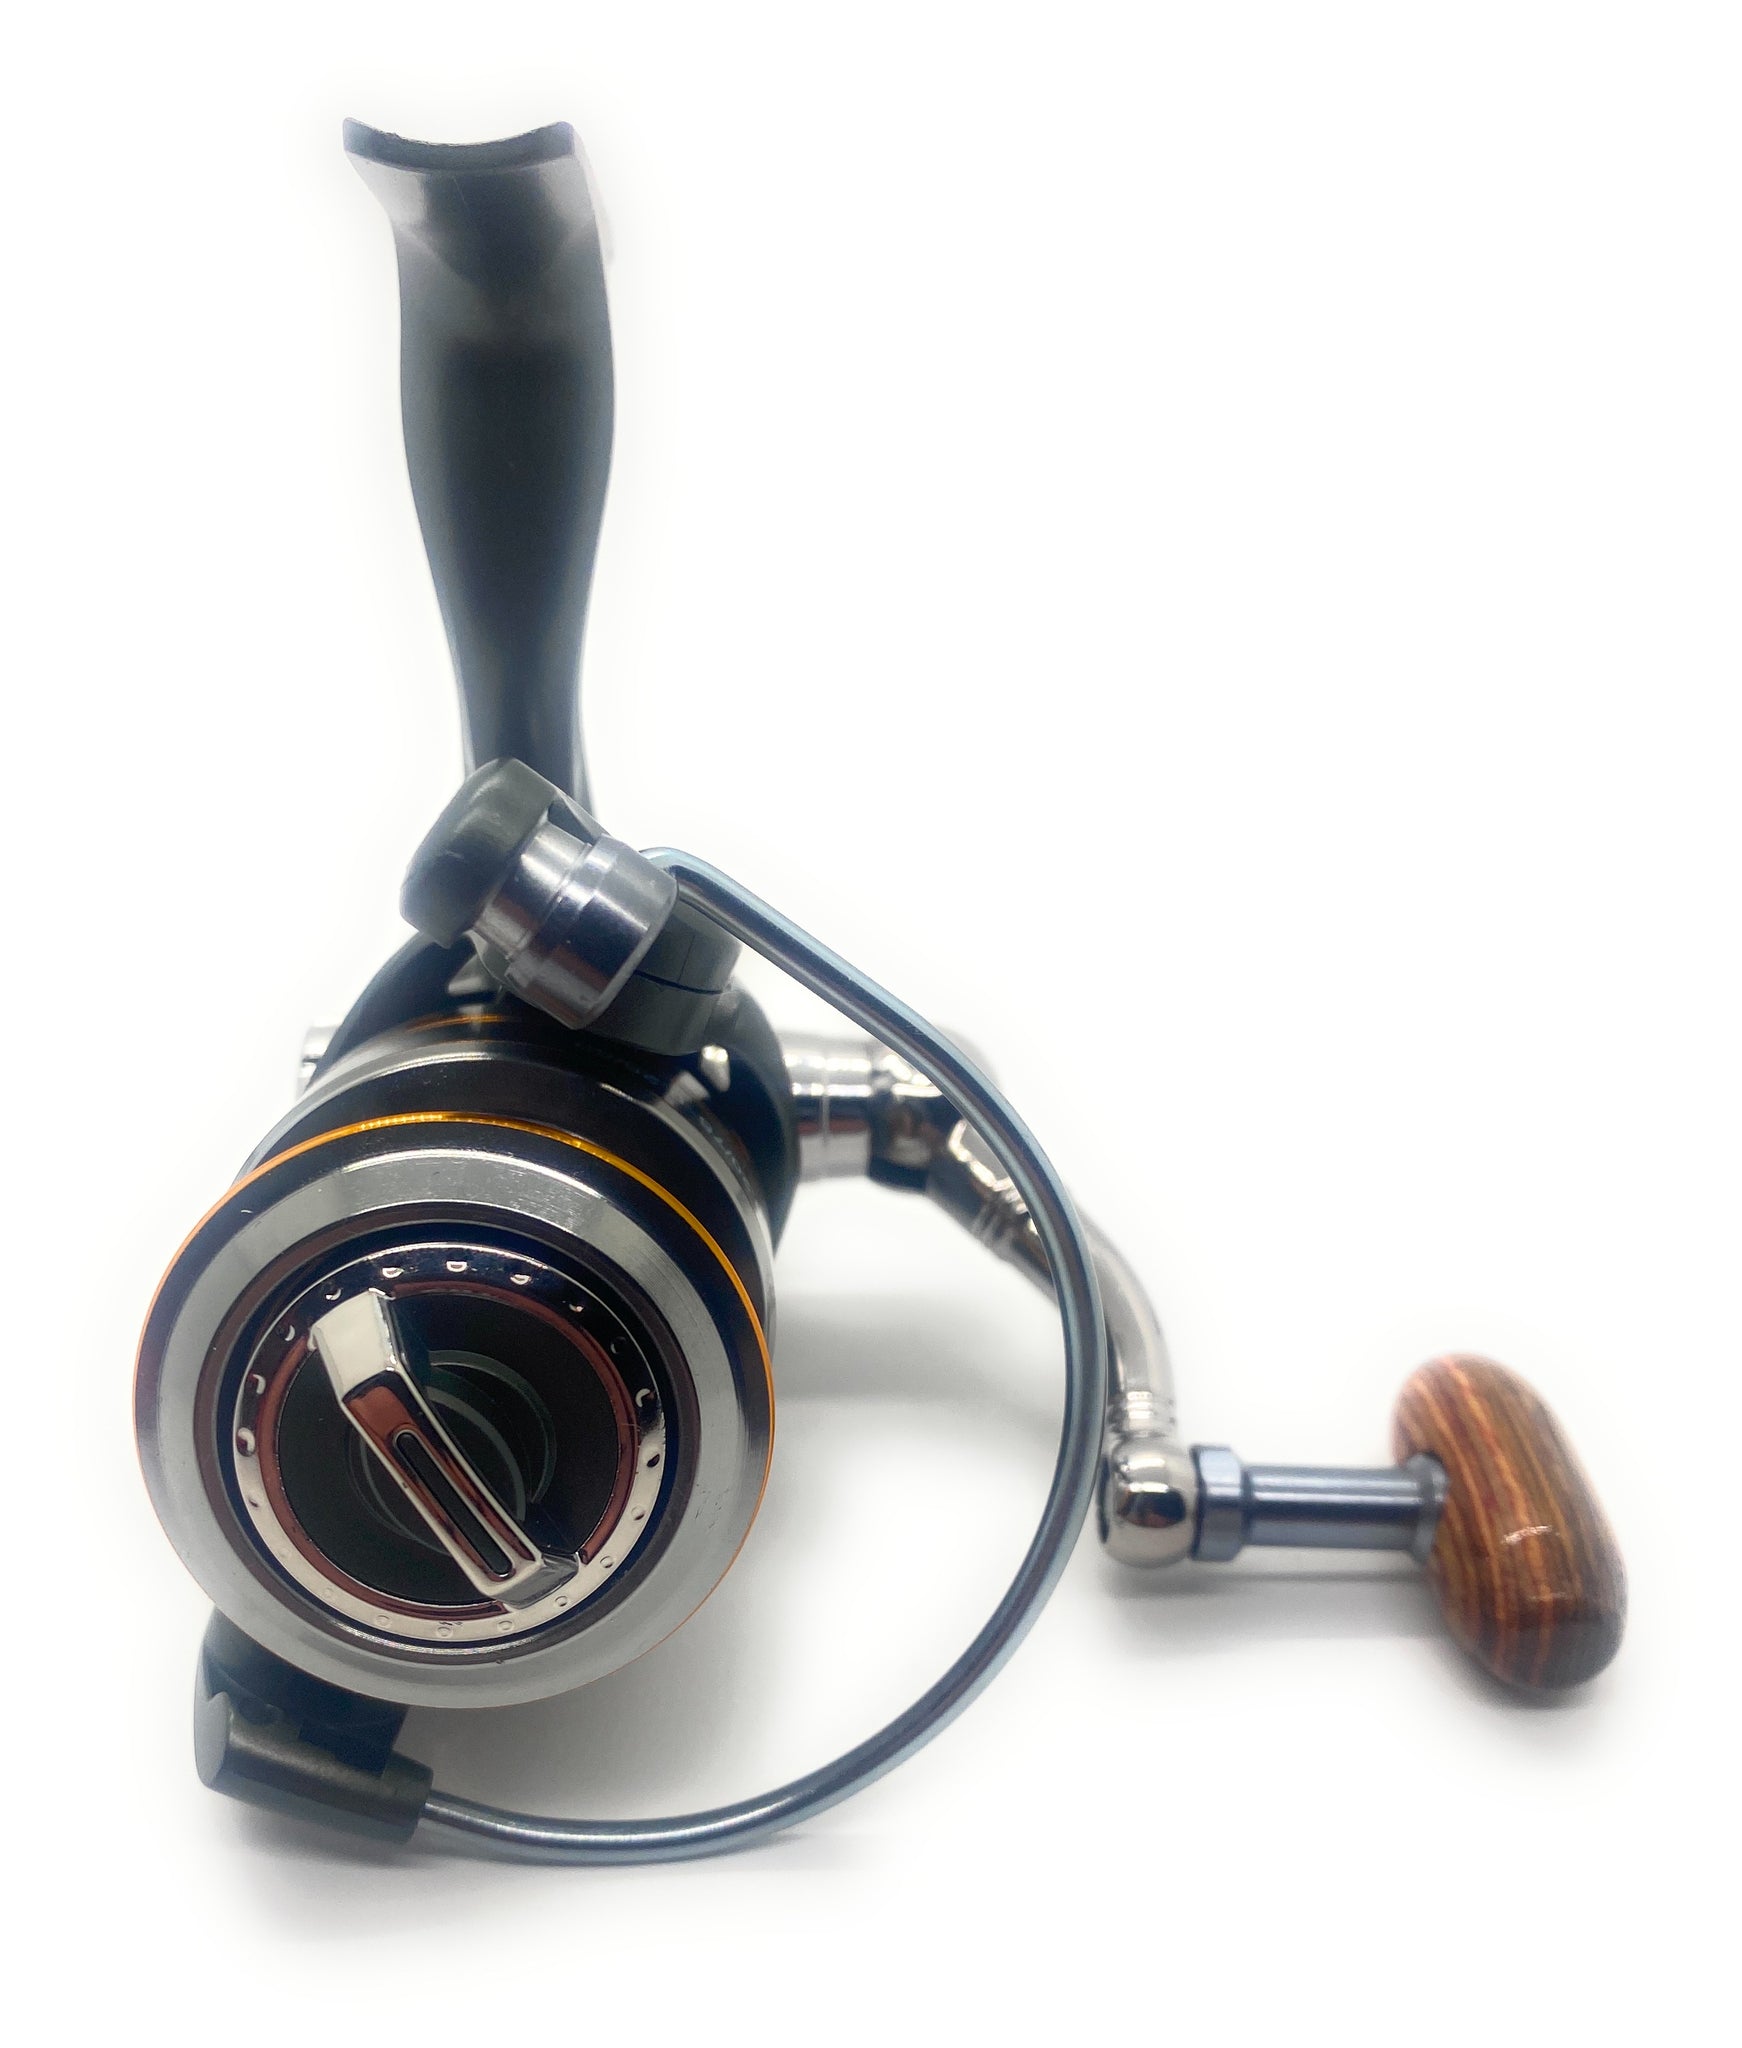 Lizard PKS 1000 ultra light spinning reel – Lazy river road outfitters